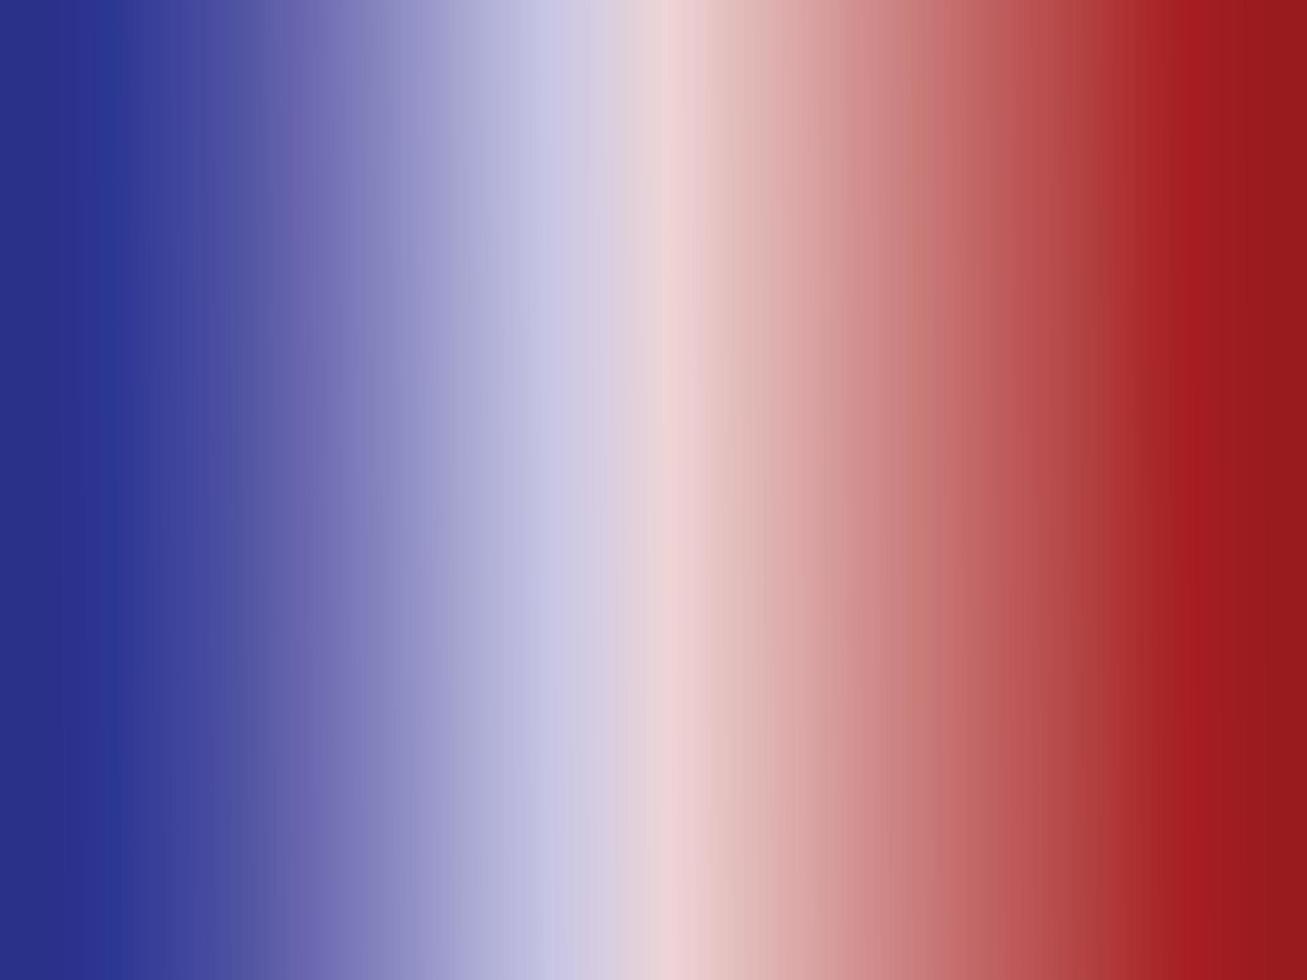 french flag color gradient background design vector